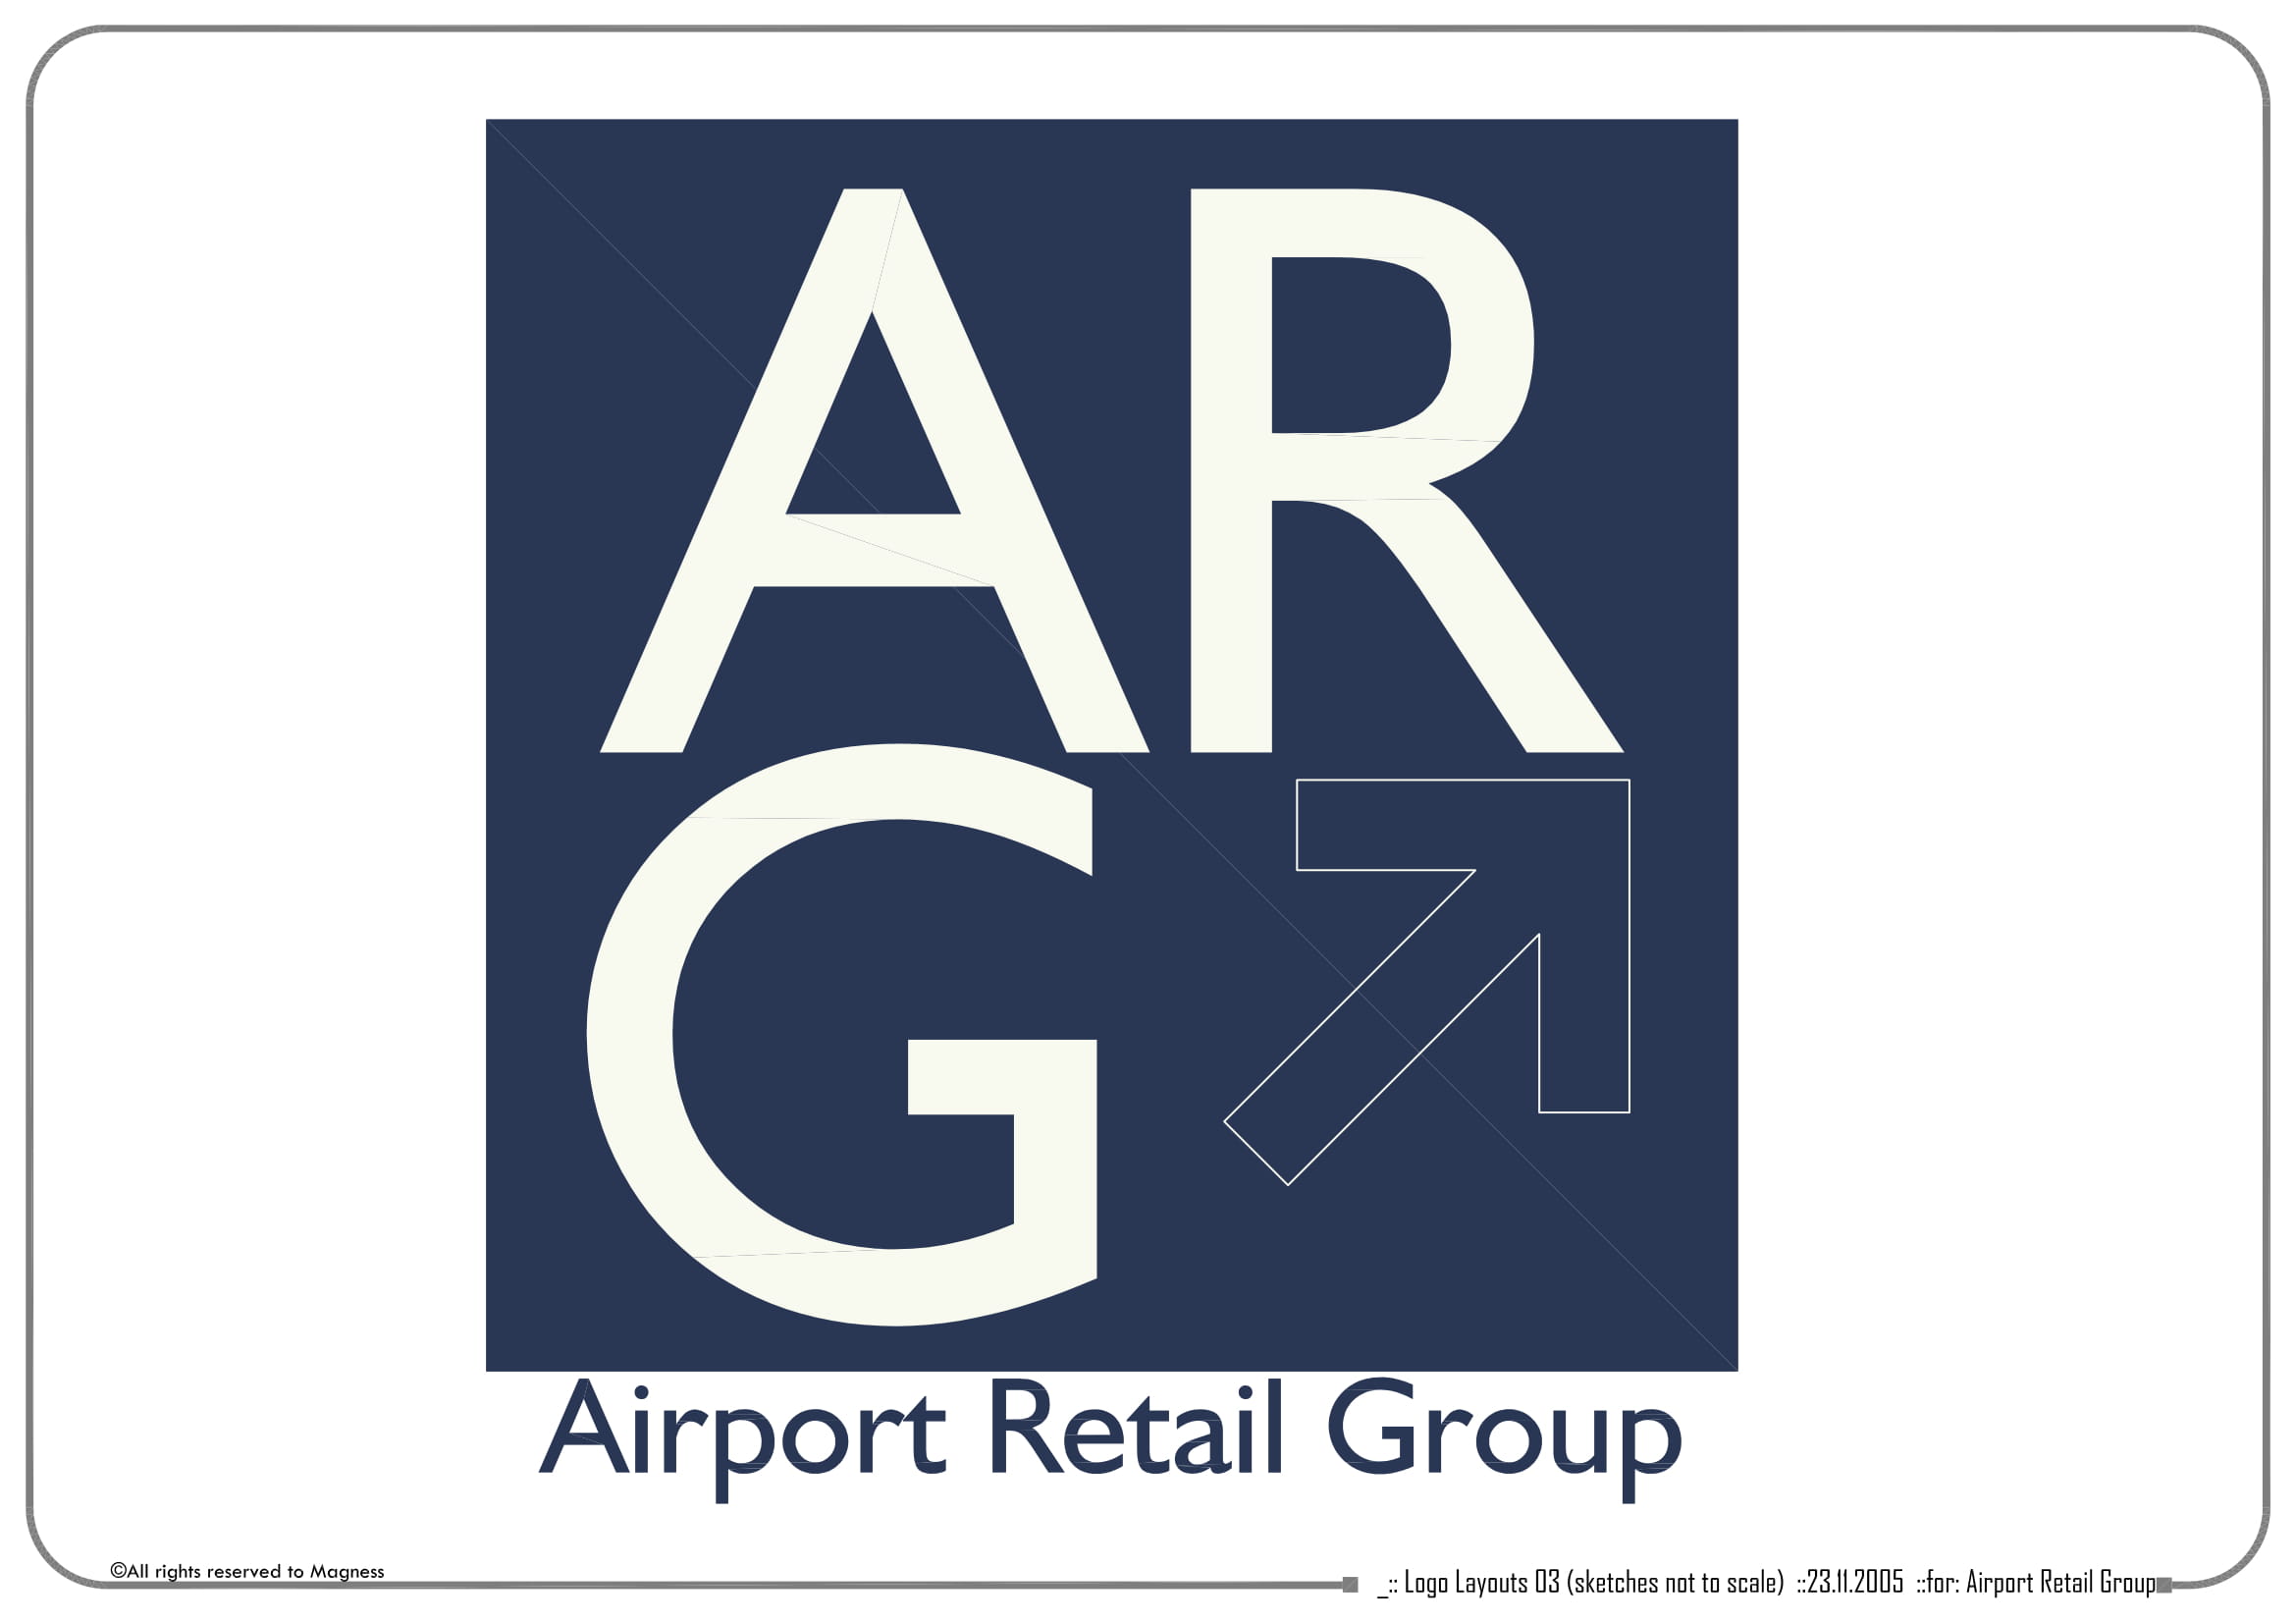 Airport Retail Group (ARG)